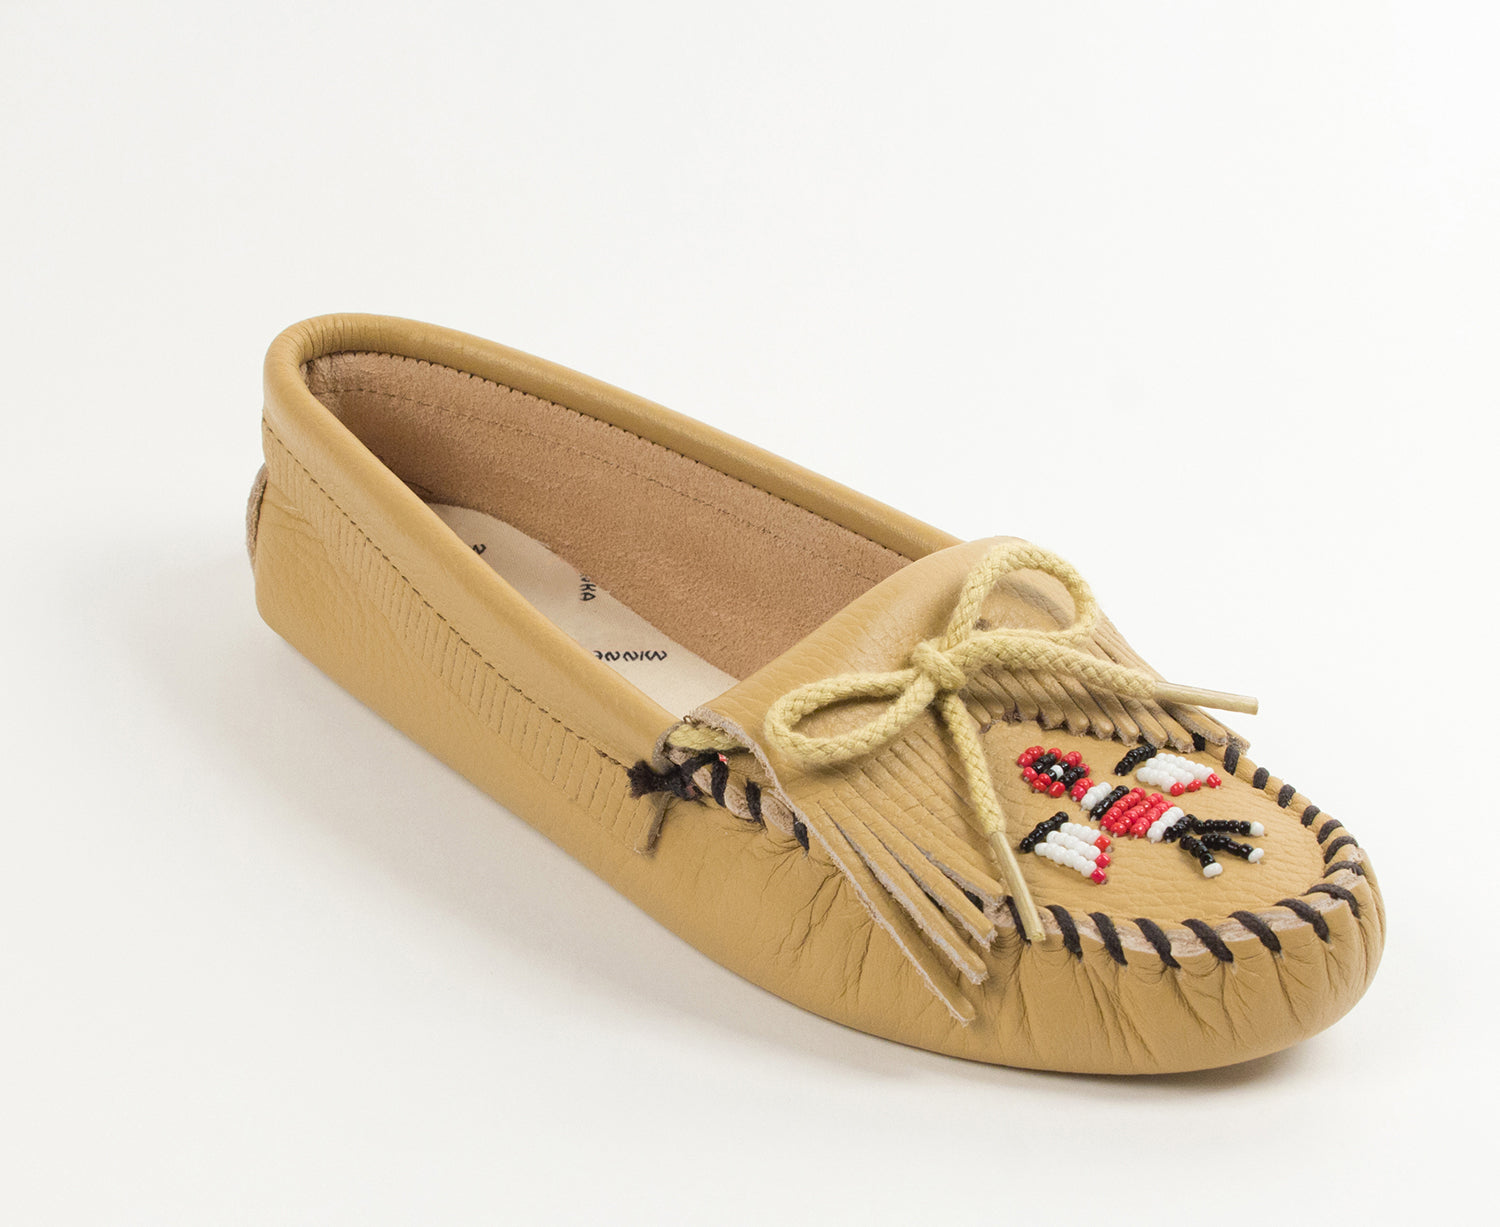 Thunderbird Softsole Moccasin in Natural from 3/4 Angle View